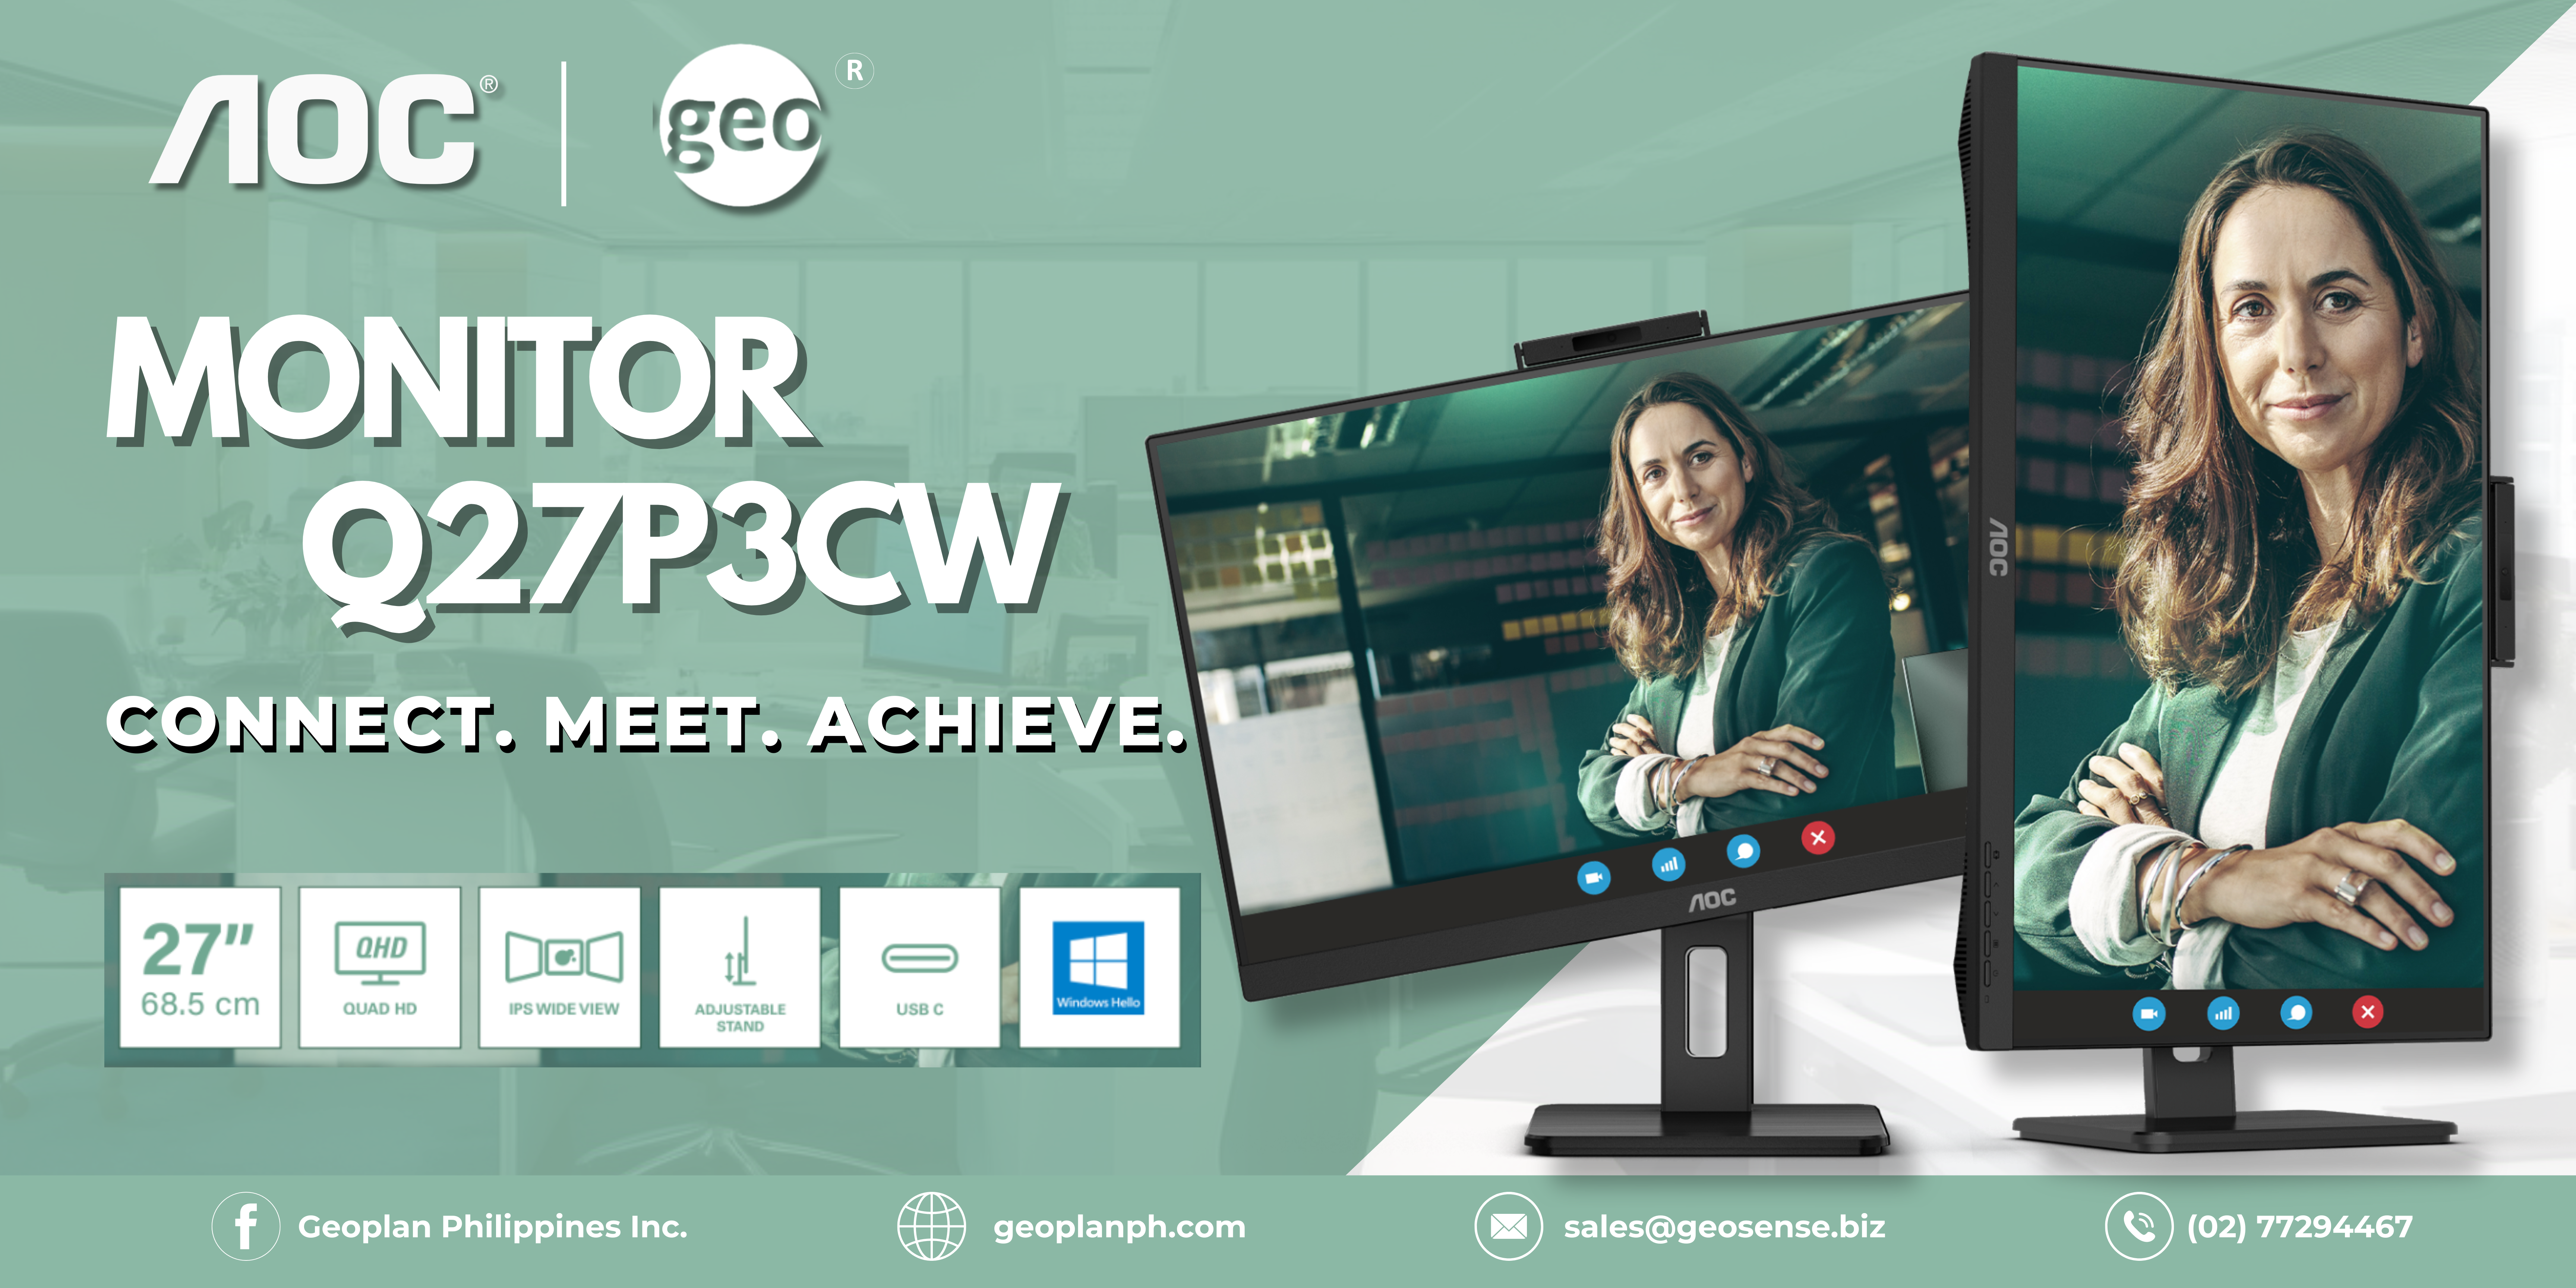 AOC: The Professional 27” IPS Monitor For Enhanced Productivity With Q27P3CW